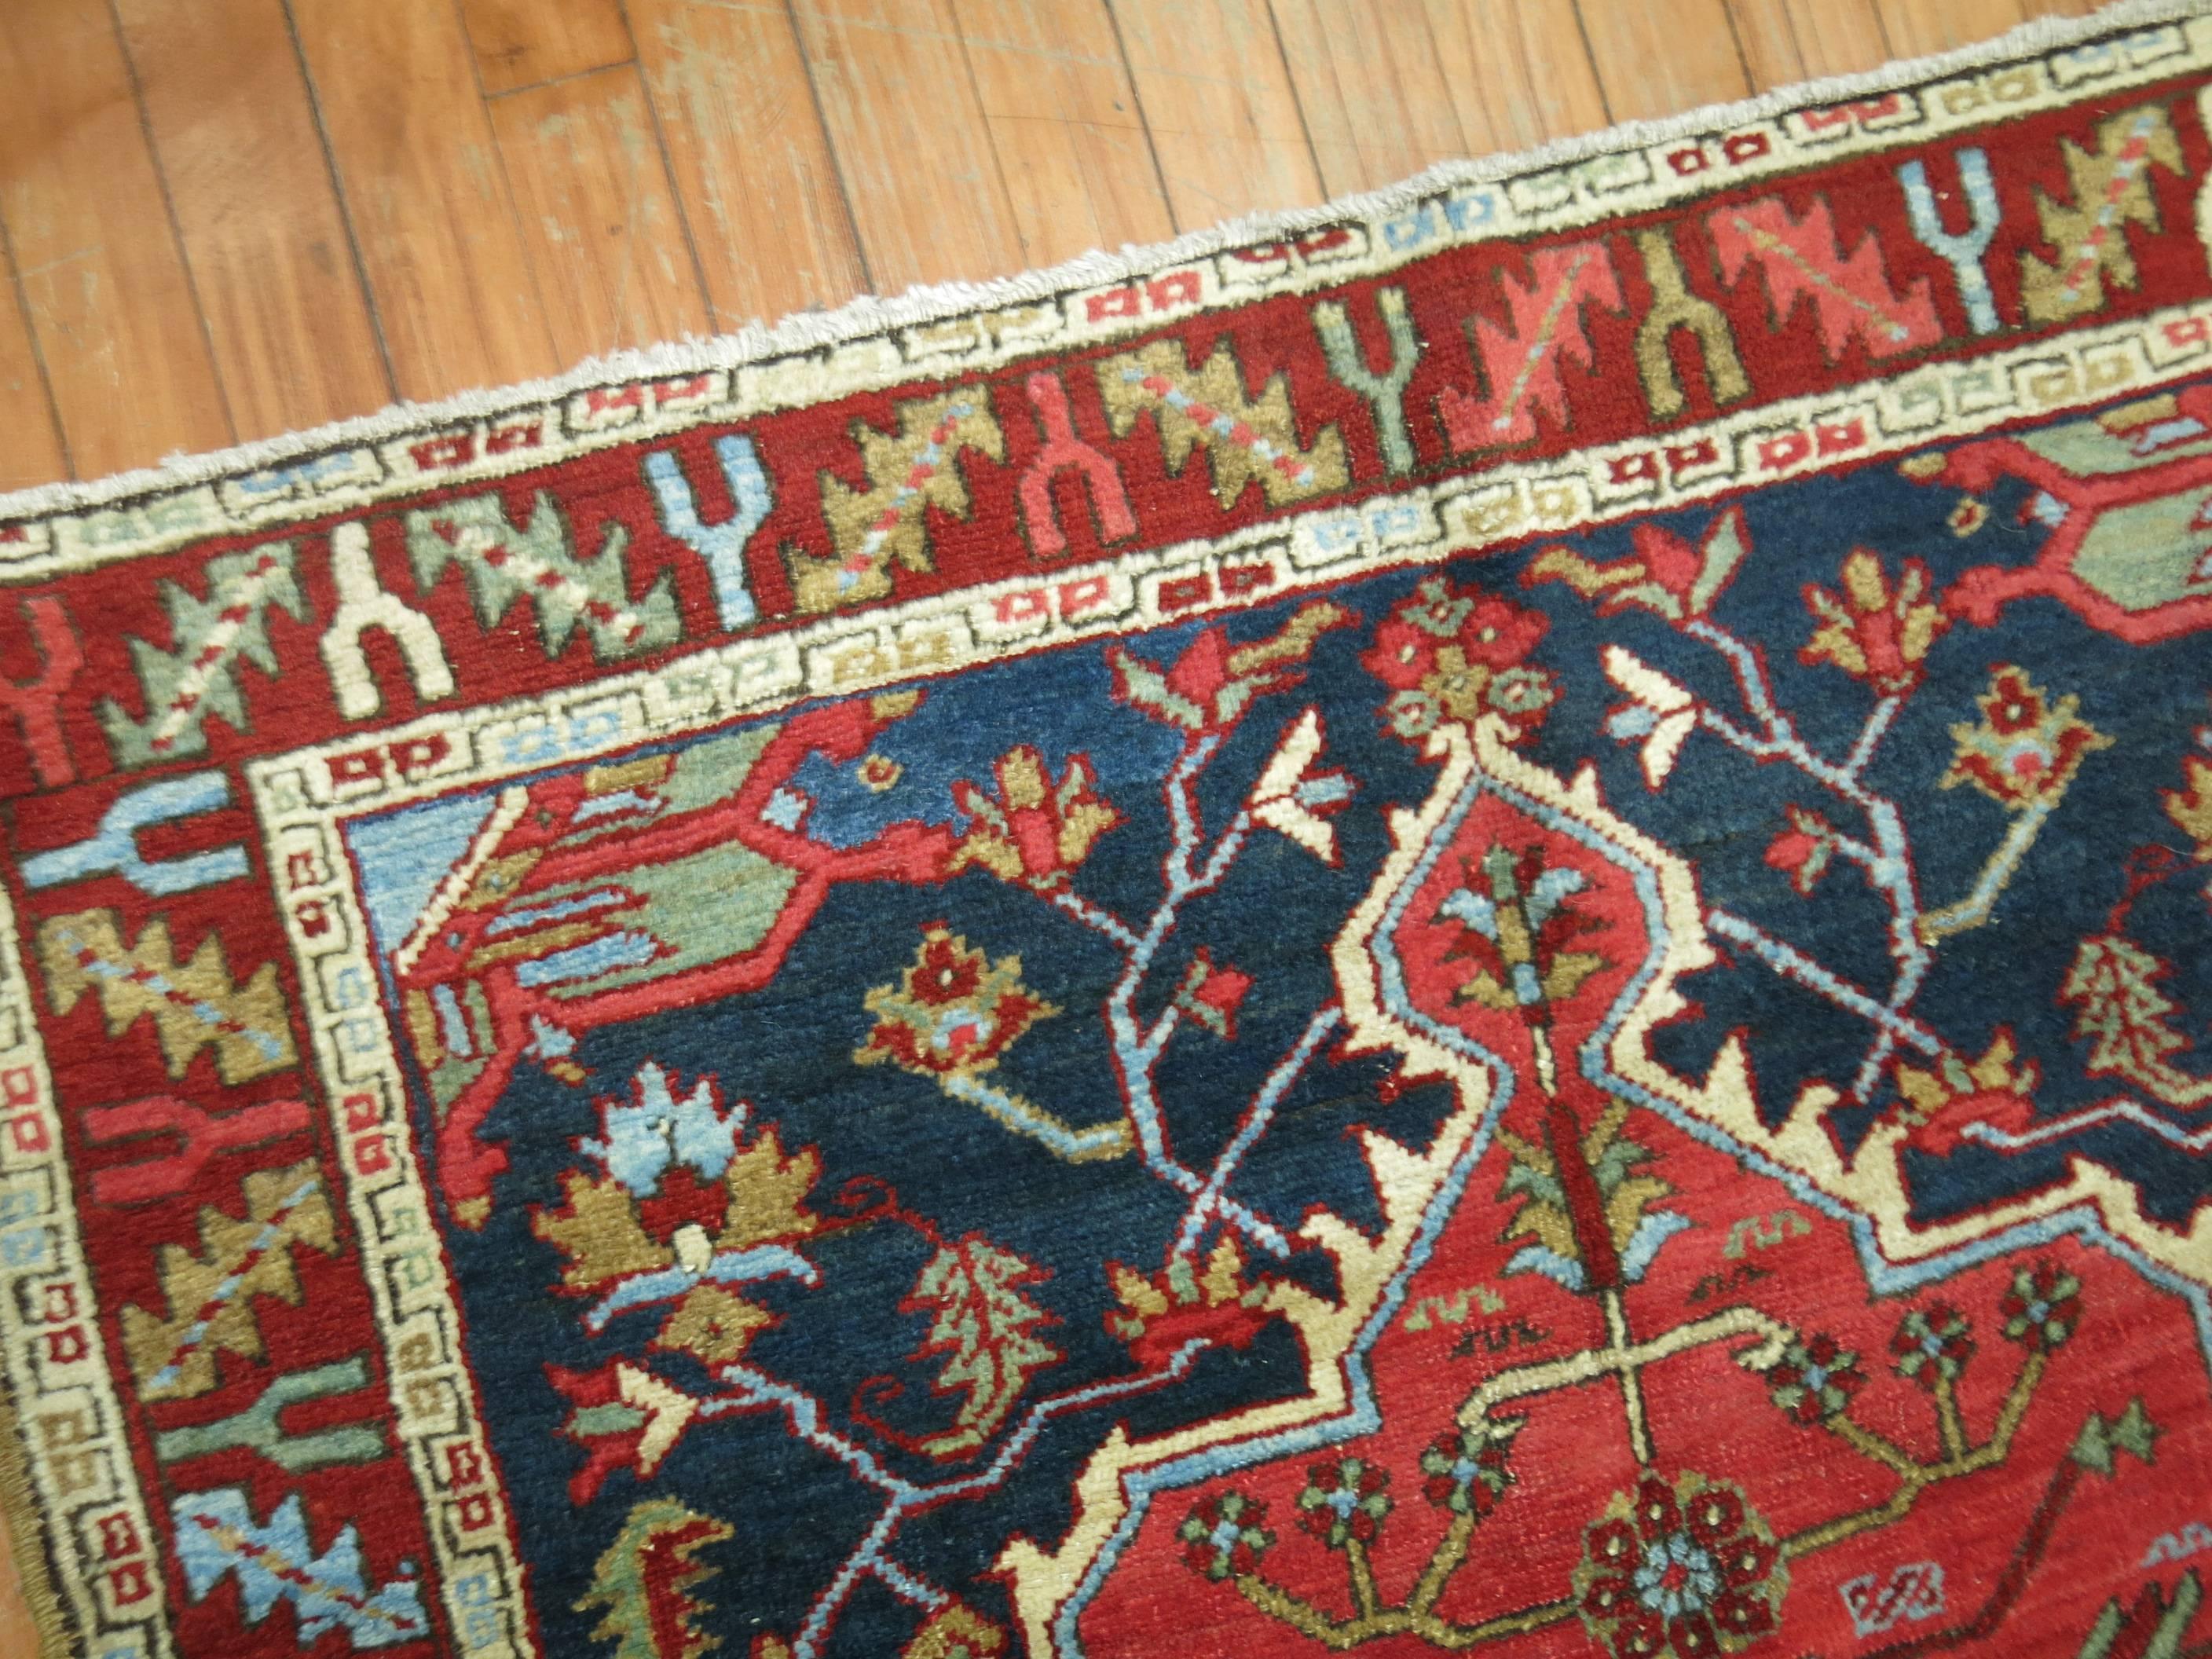 Square shaped antique Persian Heriz rug in rich navy blue and red.